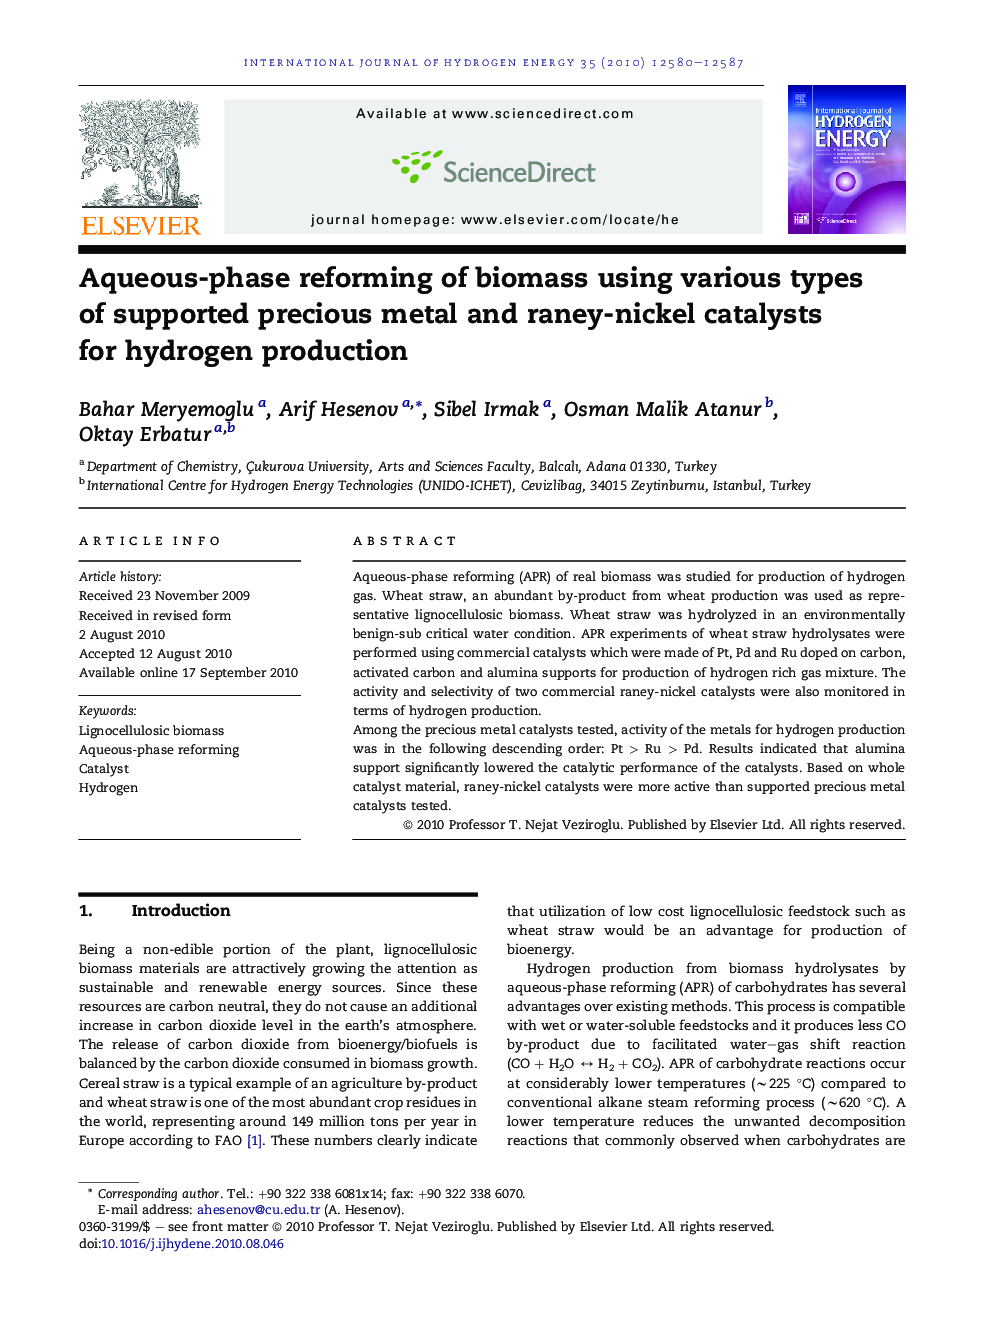 Aqueous-phase reforming of biomass using various types of supported precious metal and raney-nickel catalysts for hydrogen production